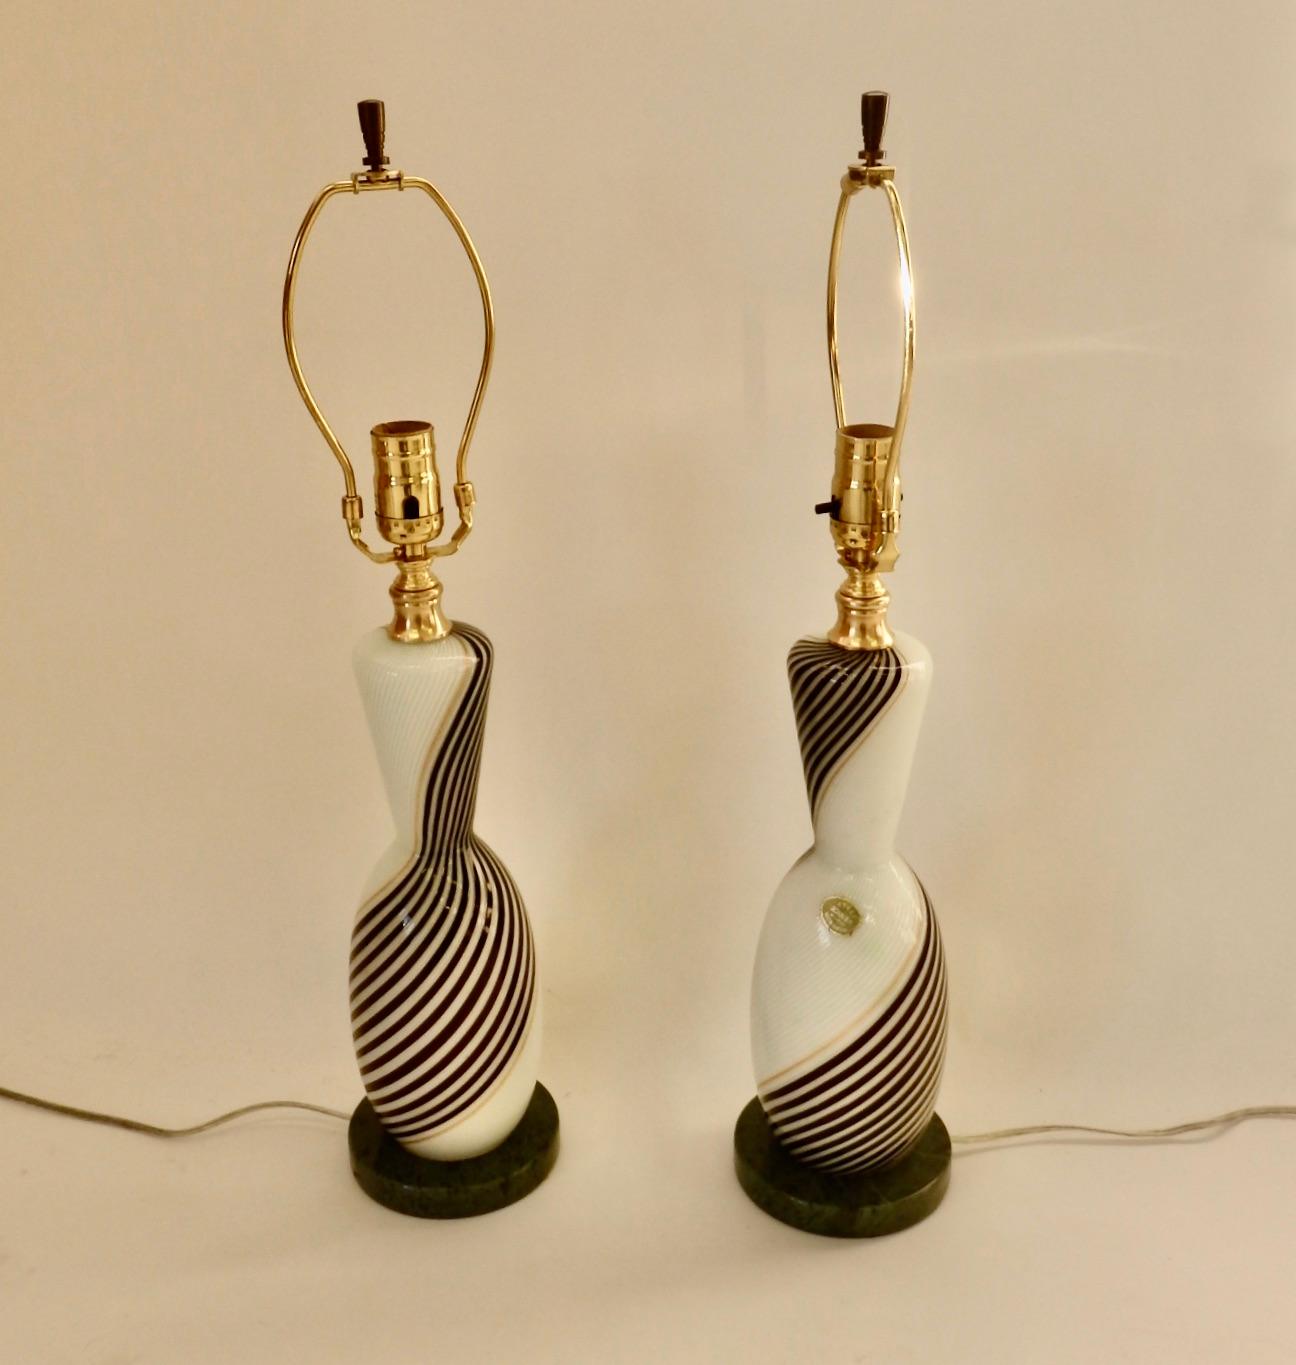 Pair of Dino Martens table lamps. Original label reads Murano glass Venice Italy. Black and white swirl with gold detail. Freshly wired on green marble bases. Original finials included.